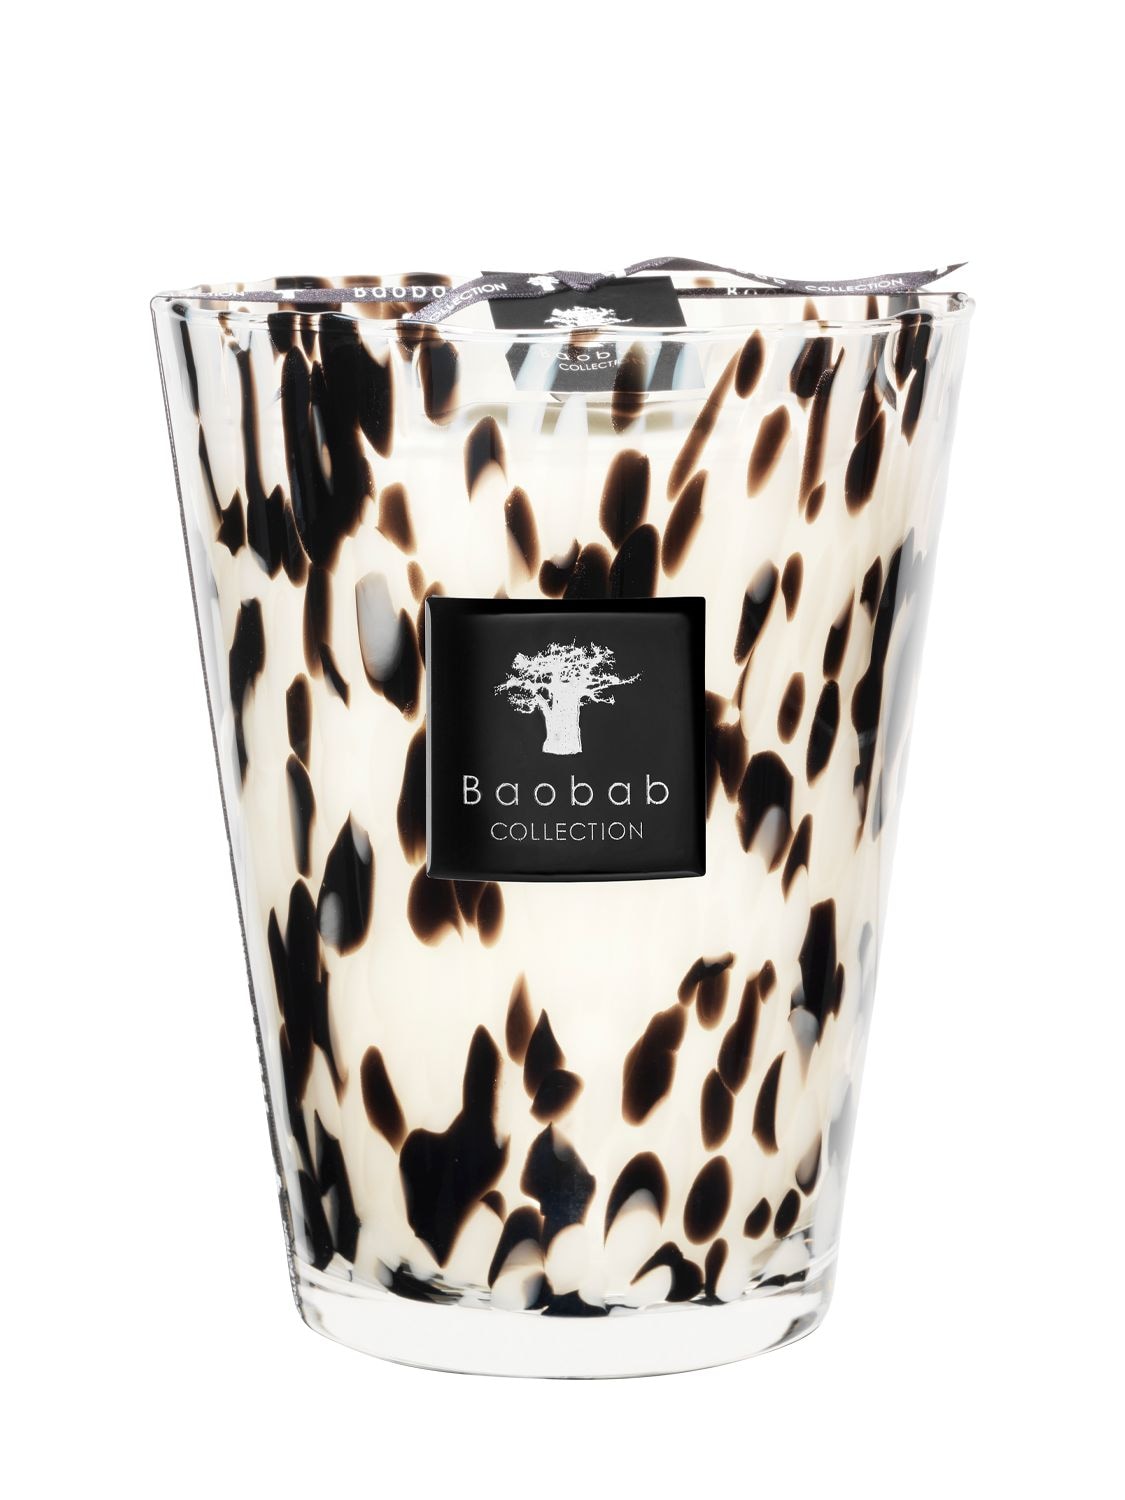 Baobab Collection Black Pearls Candle In Transparent